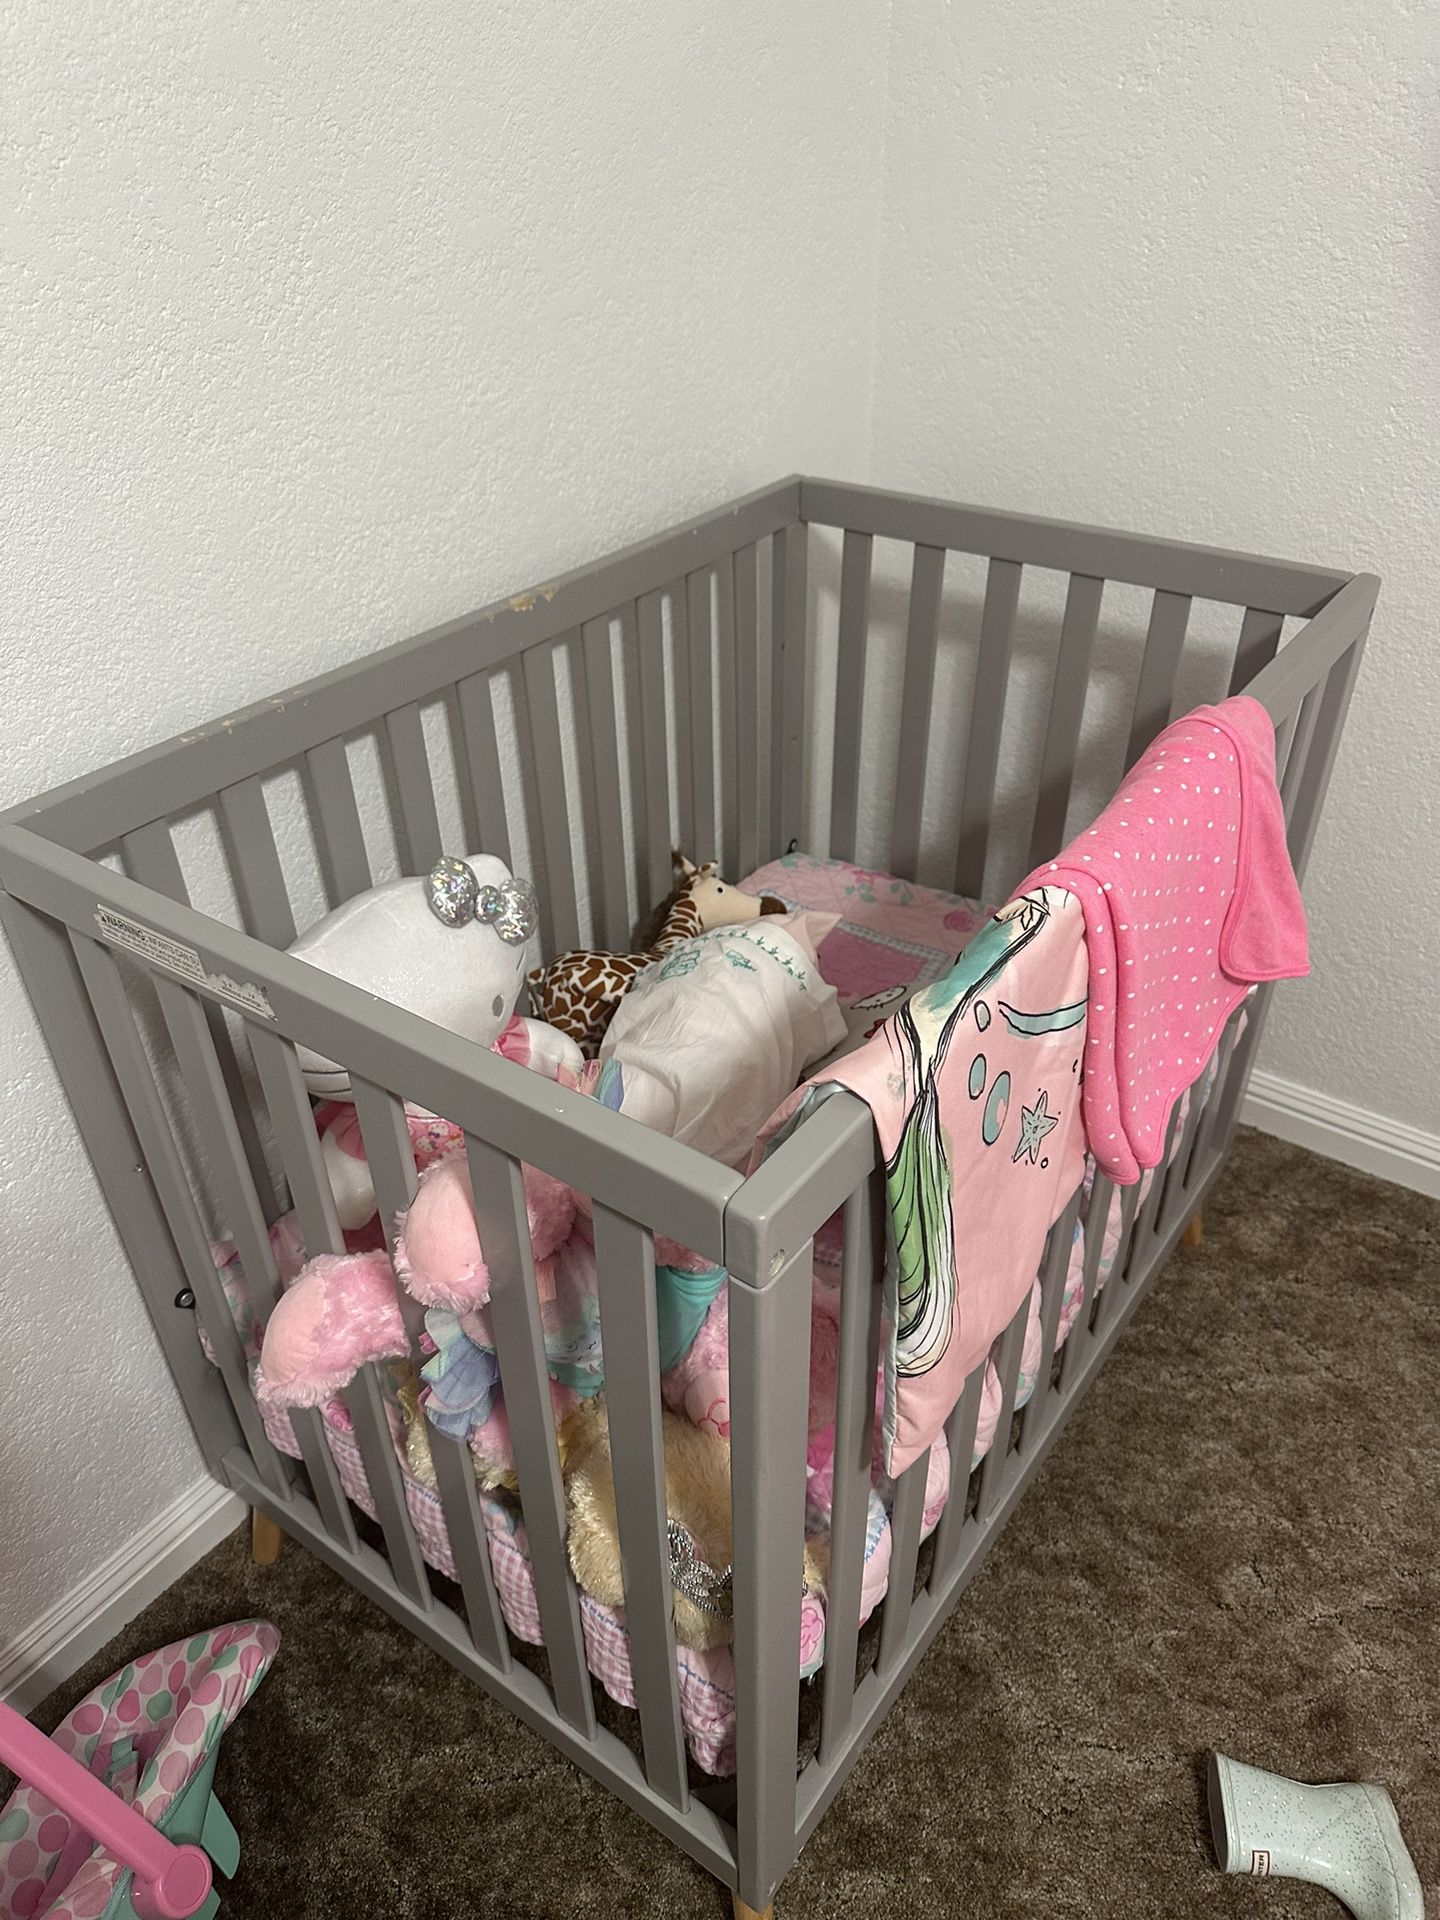 Crib For Infant Used 